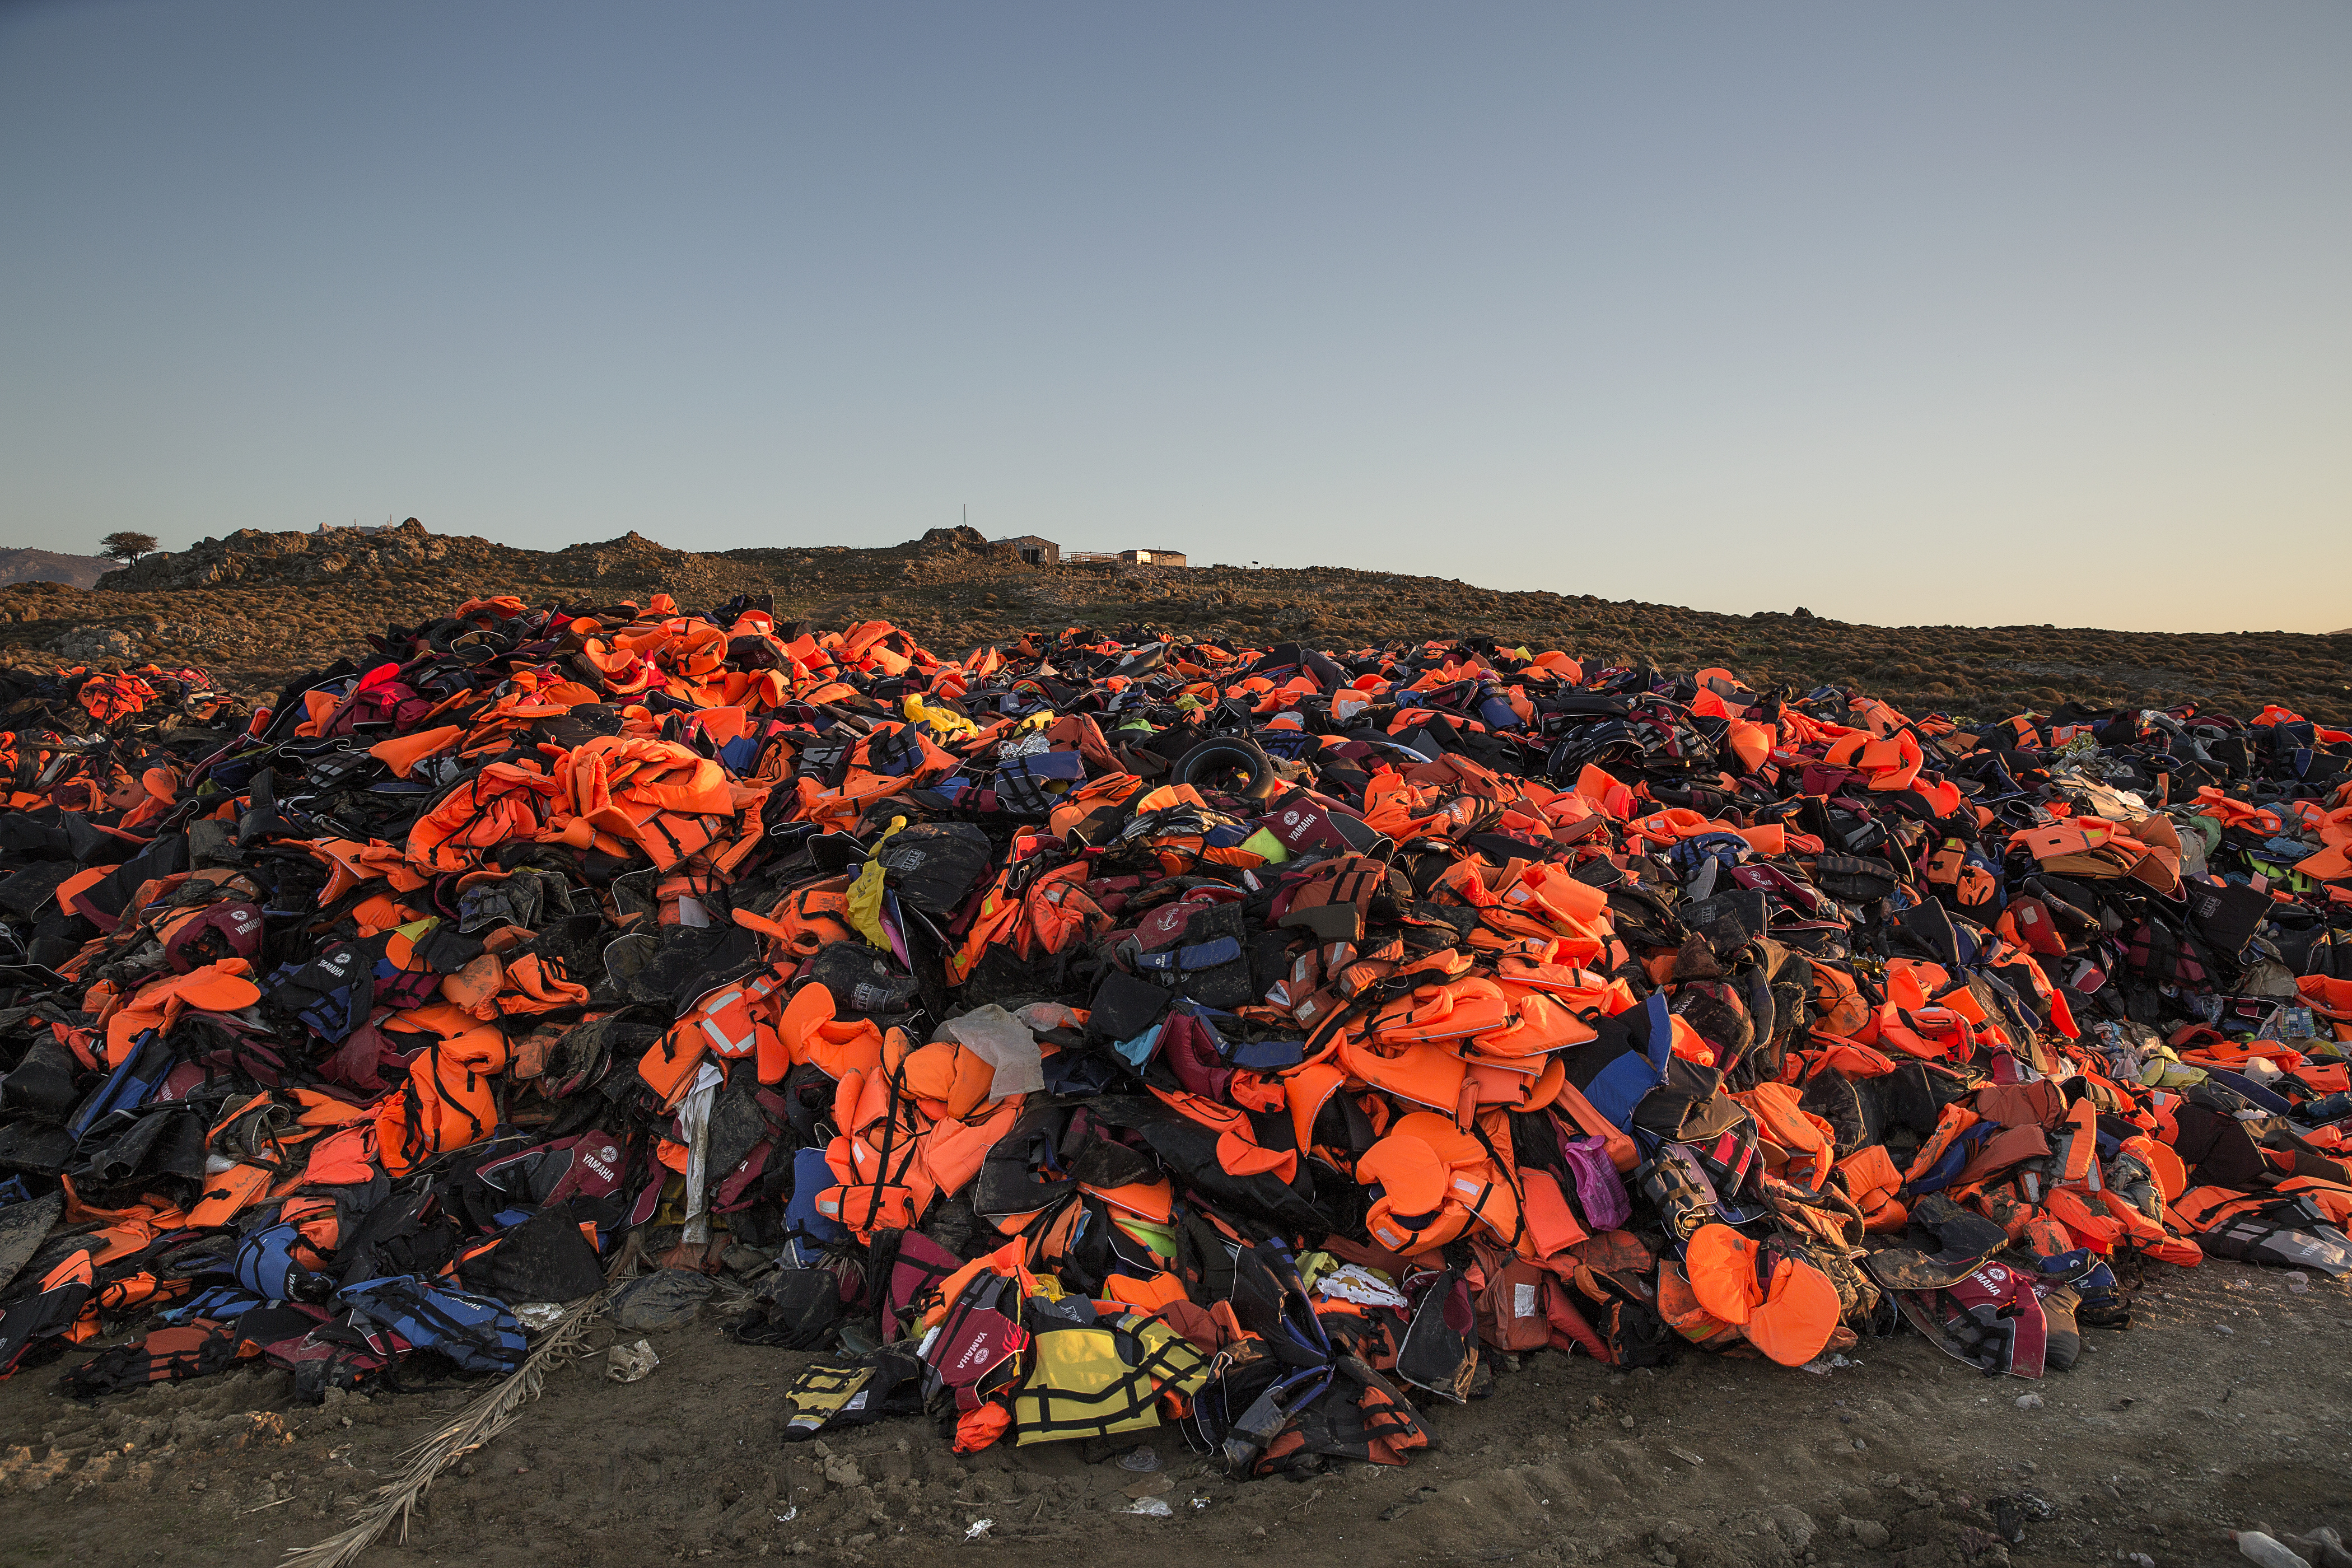 Lifejackets are seen  taking over a garbage dump in Molyvos, Lesbos on Nov. 12, 2015 (Paula Bronstein—Getty Images)